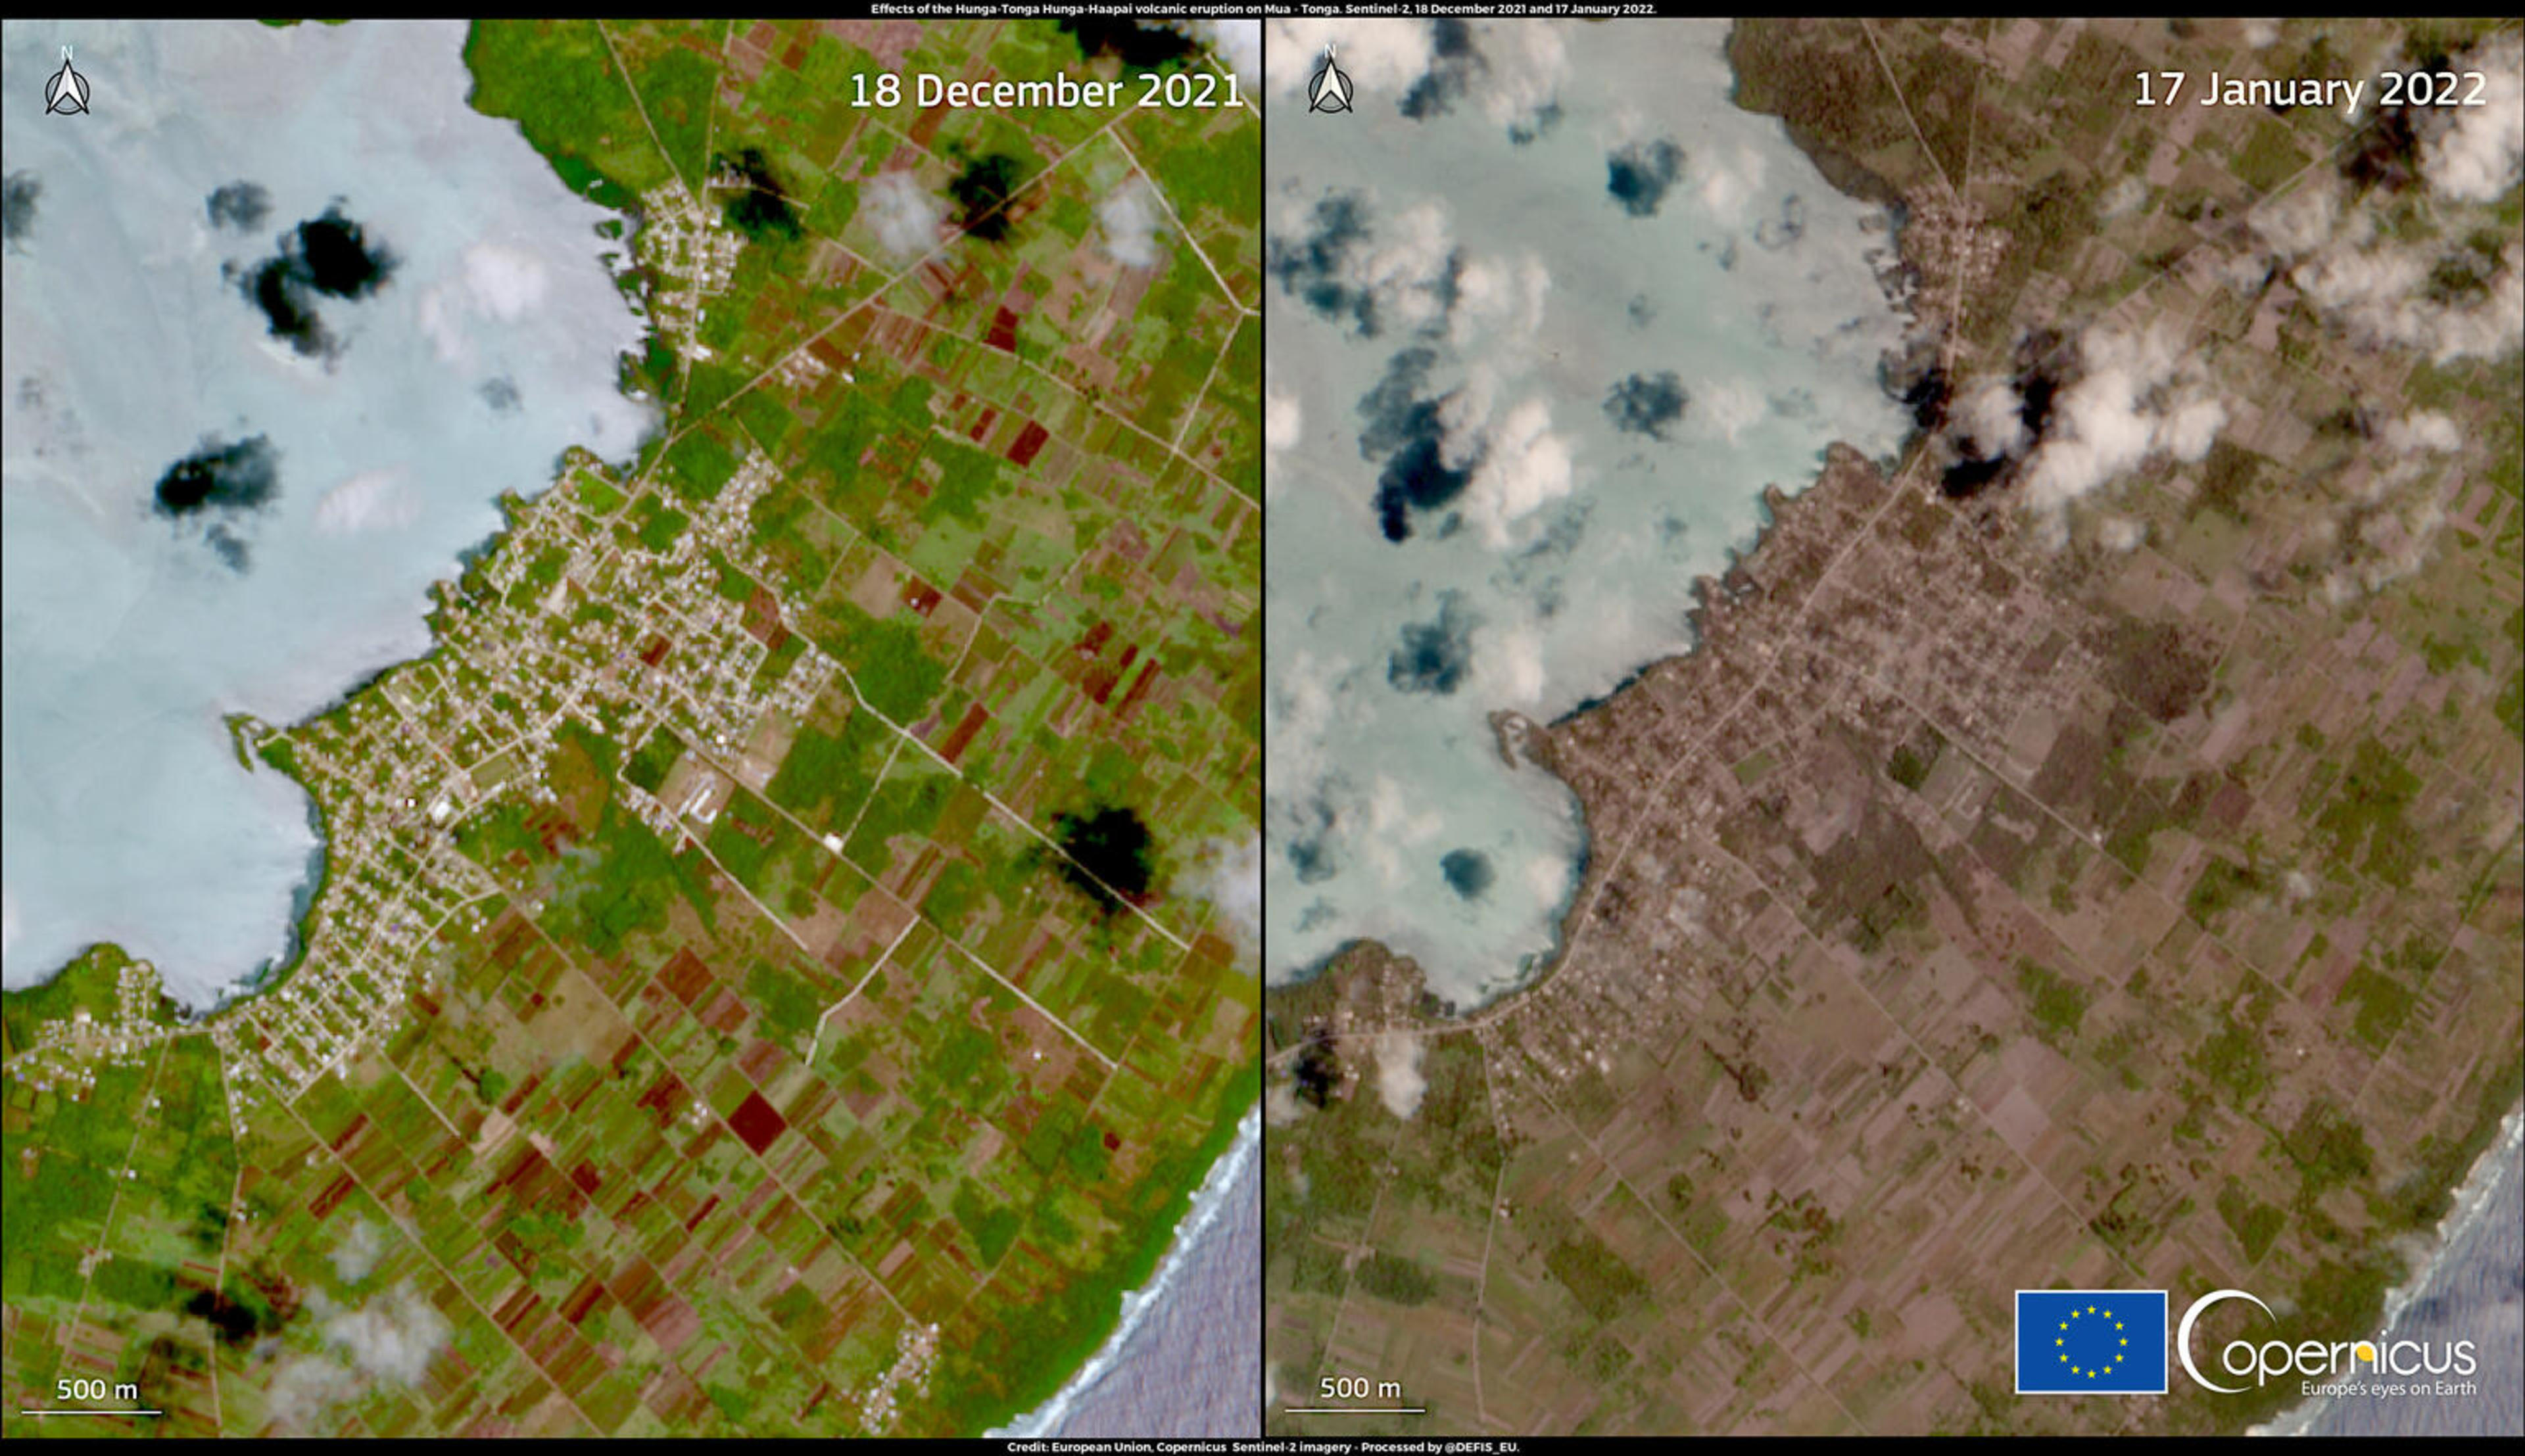 Before and After the Tonga eruption and tsunami, captured by aerial photograph 